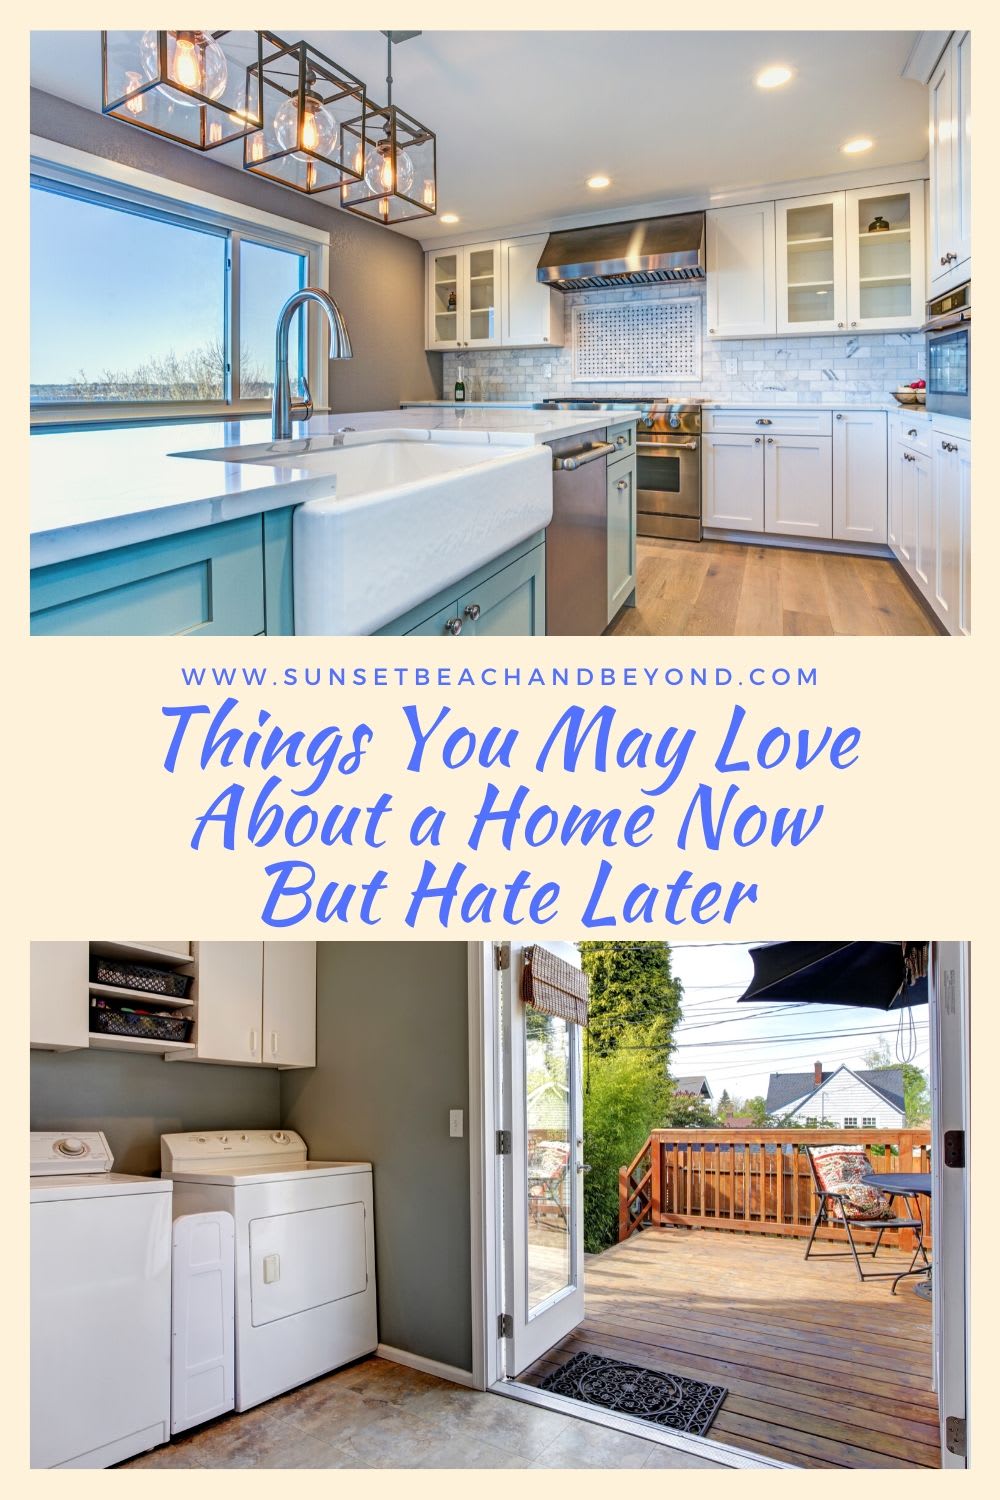 Things You May Love About a Home Now But Hate Later